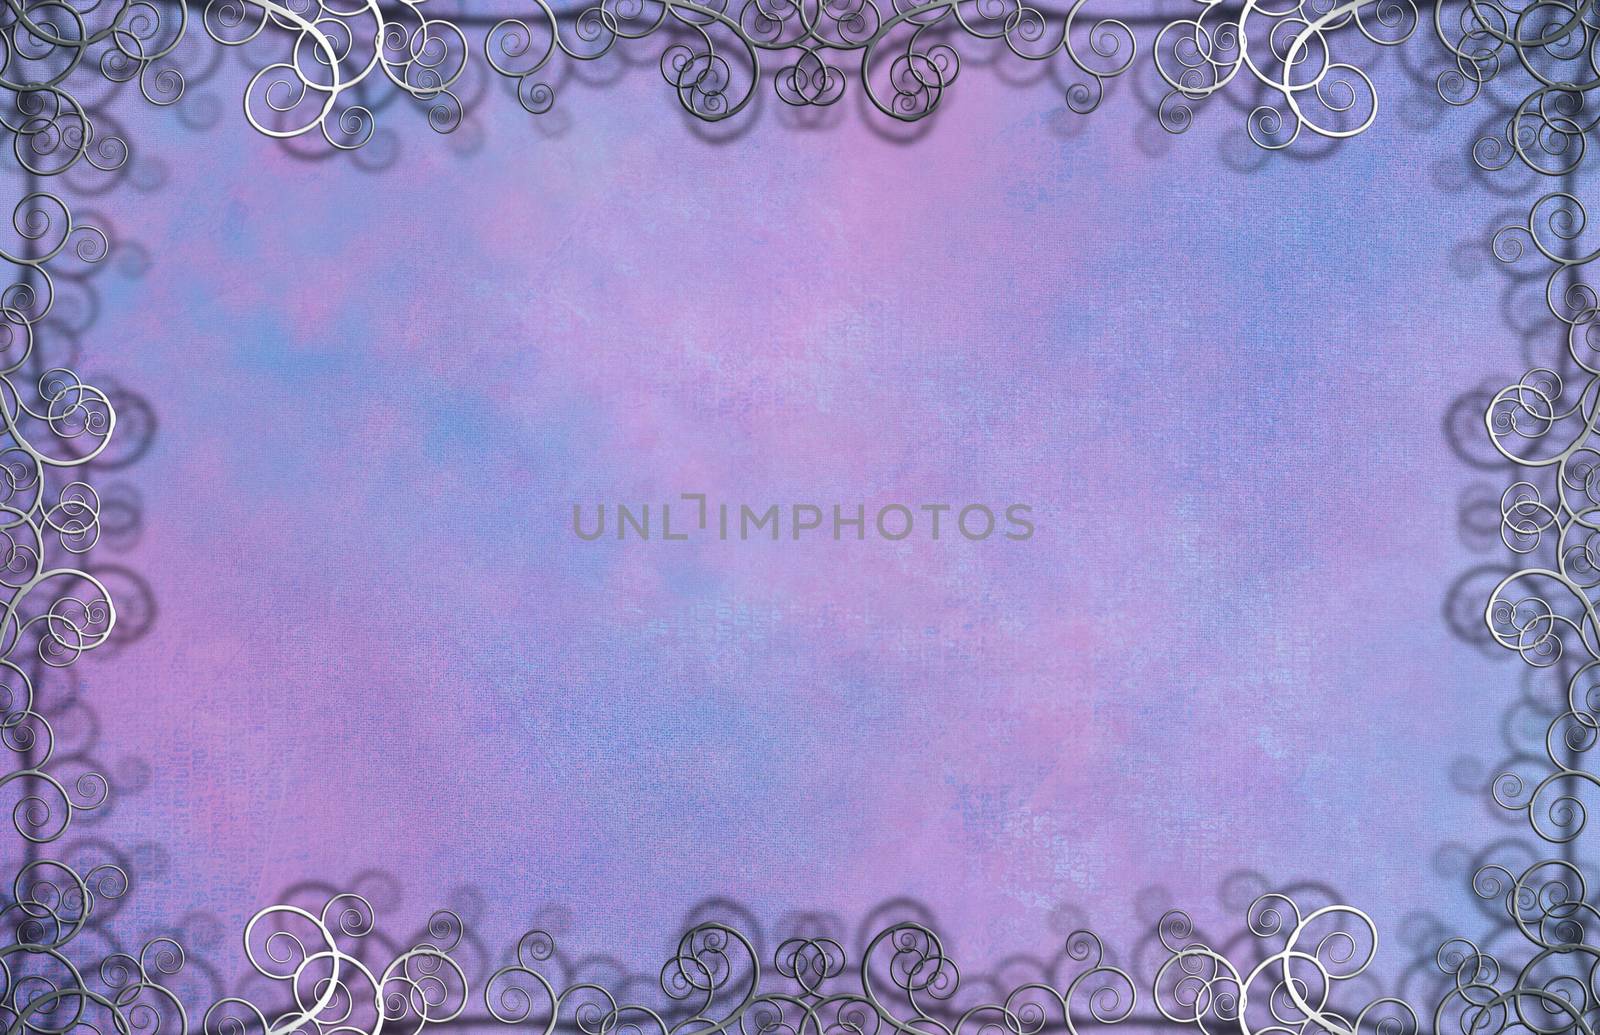 Textured Background with Flourishes. Purple colors